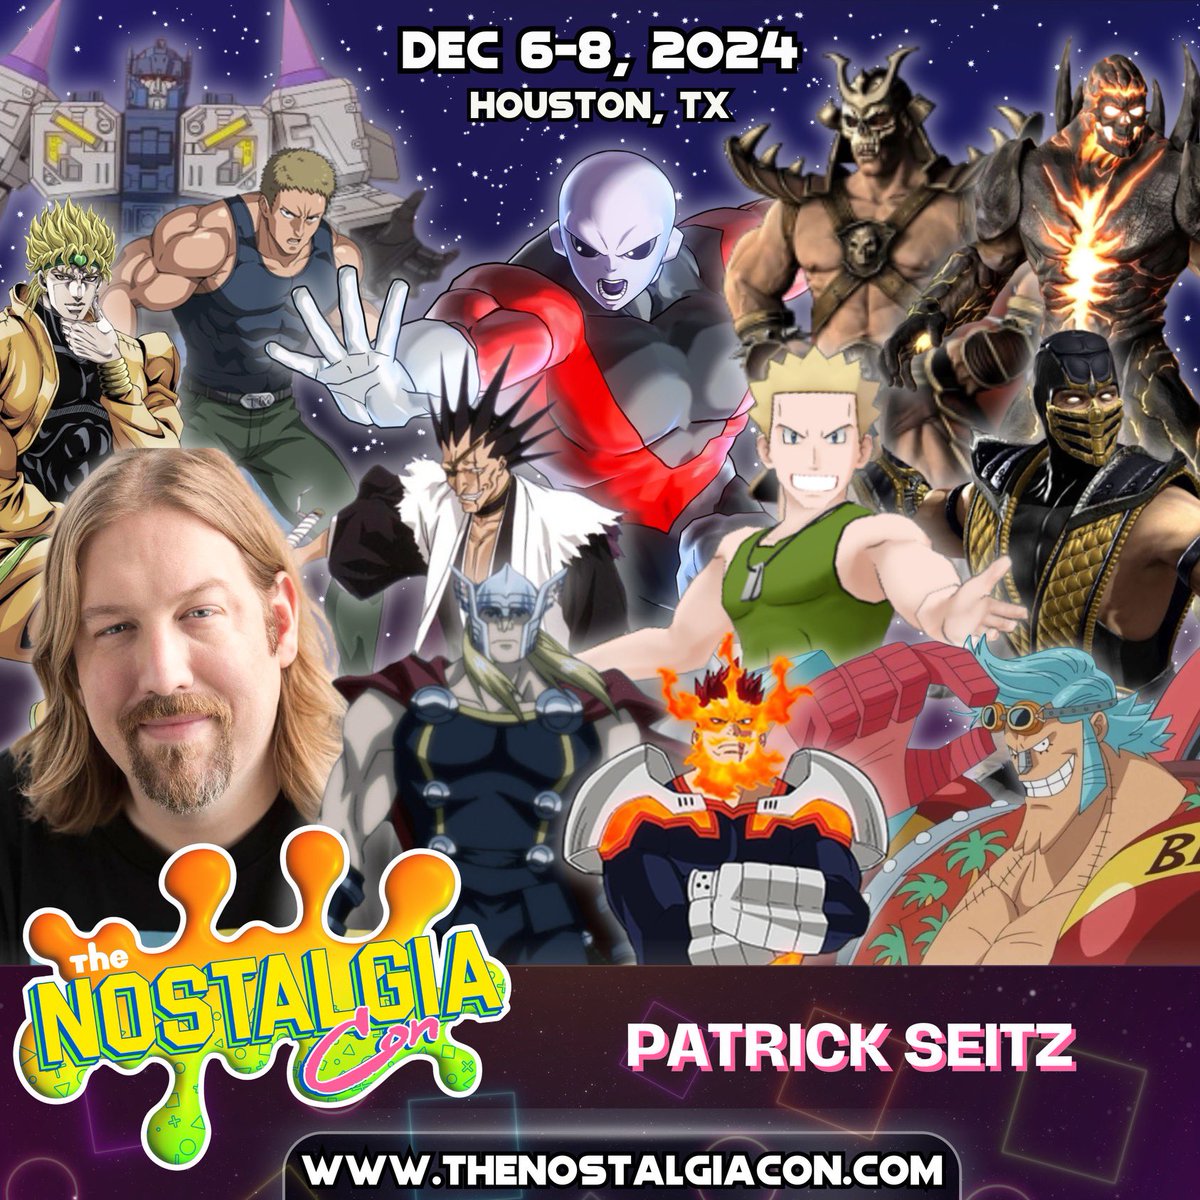 Houston fans, it doesn’t get much better than this. We are extremely fortunate to provide an opportunity to meet voice over legend @seitz_unseen 🤩 Patrick is one of the biggest names in the industry and you won’t want to miss it!